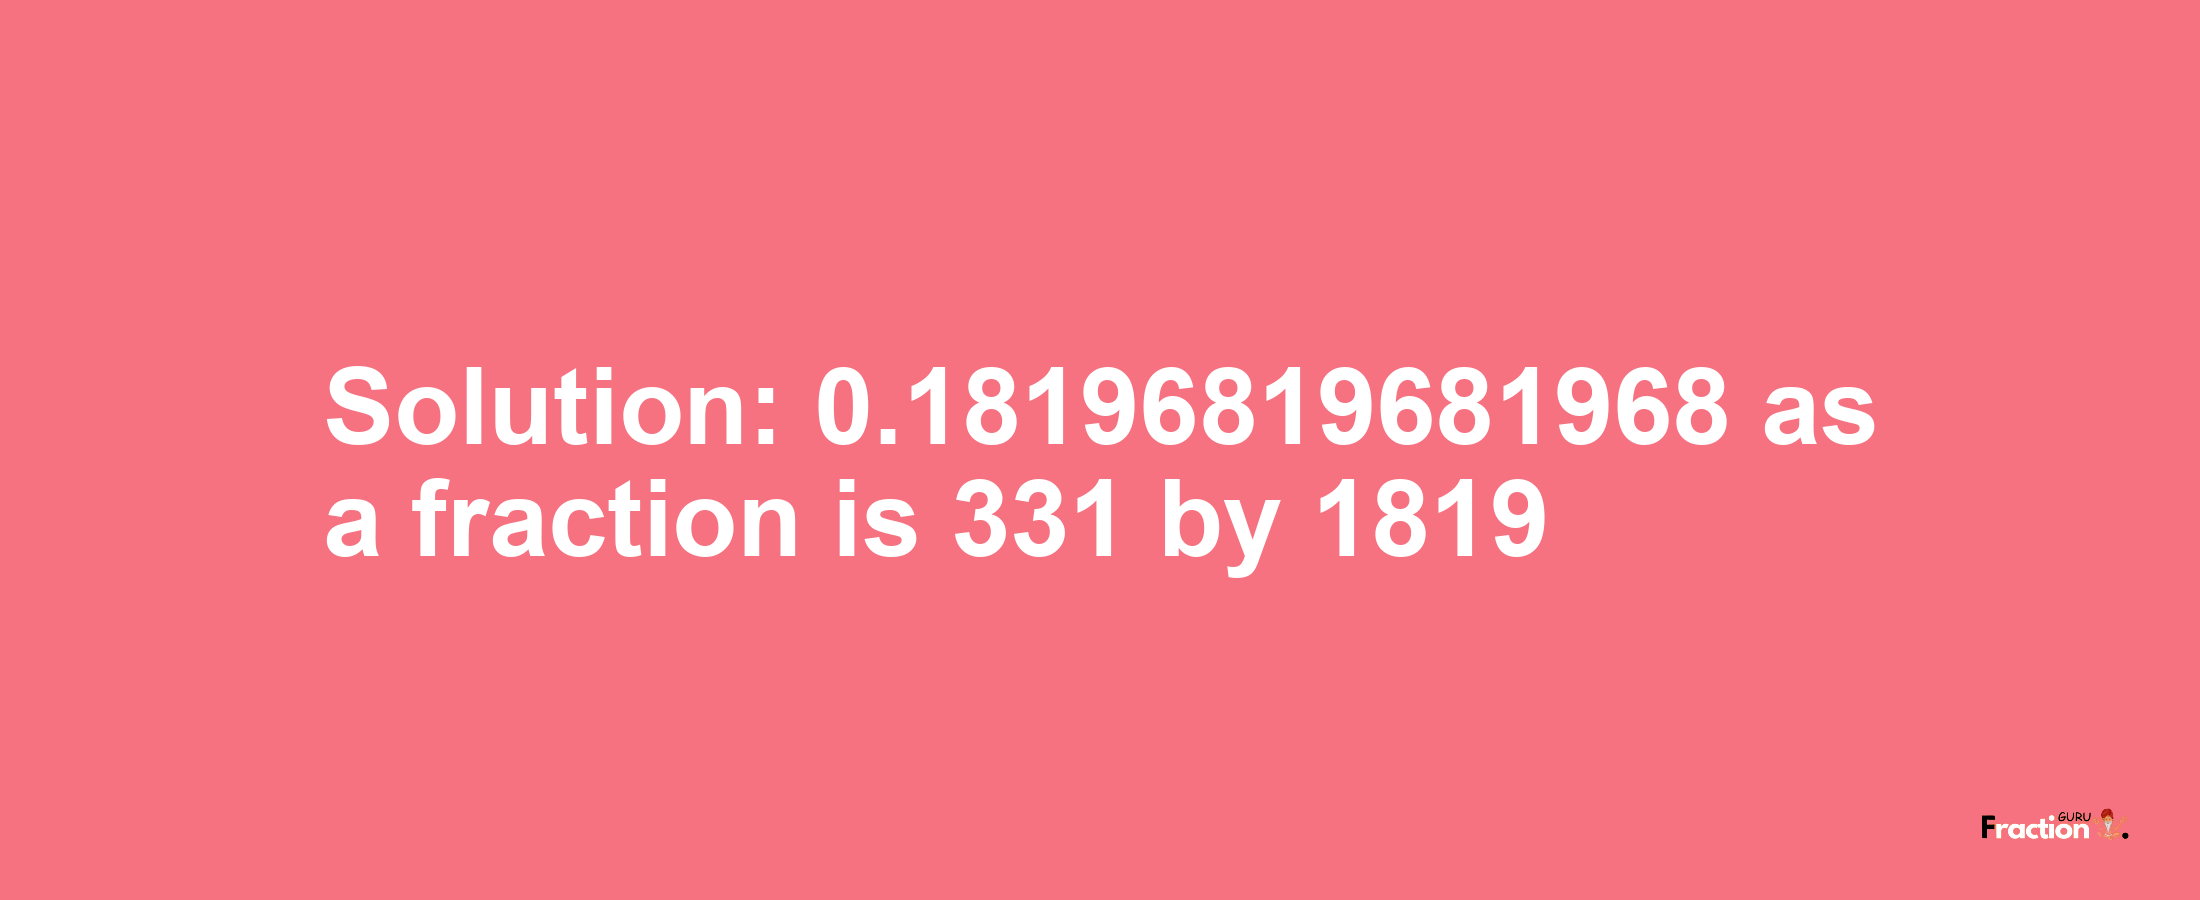 Solution:0.18196819681968 as a fraction is 331/1819